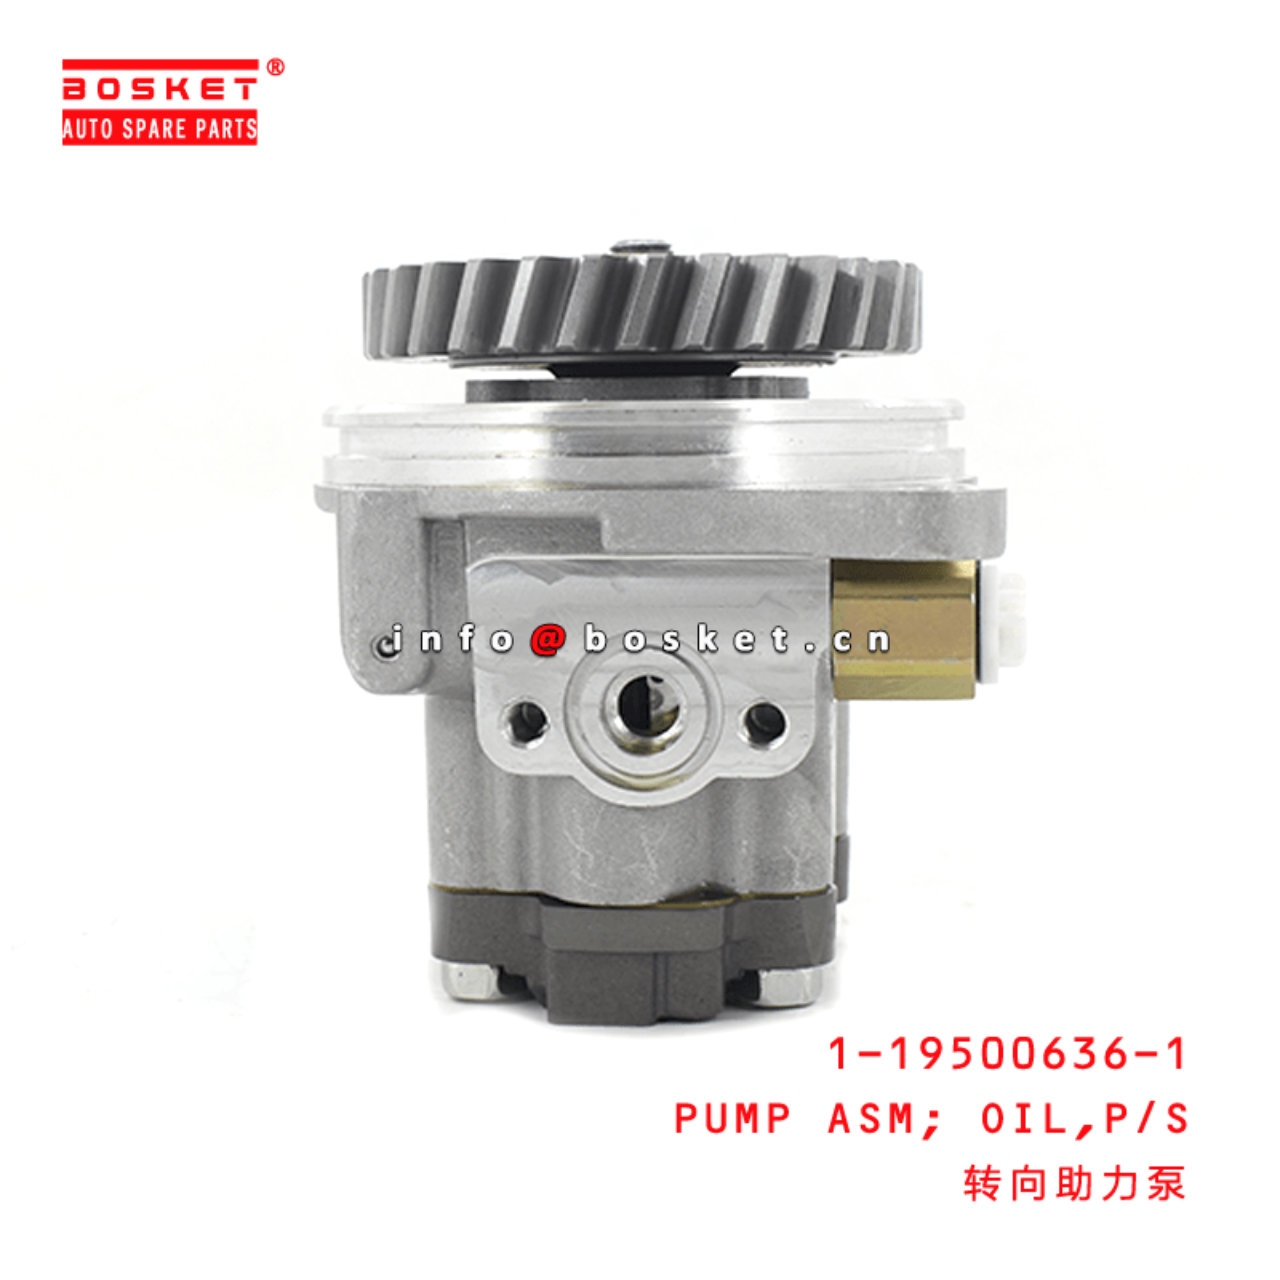 1-19500636-1 Power Steering Oil Pump Assembly 1195006361 Suitable for ISUZU F Series Truck